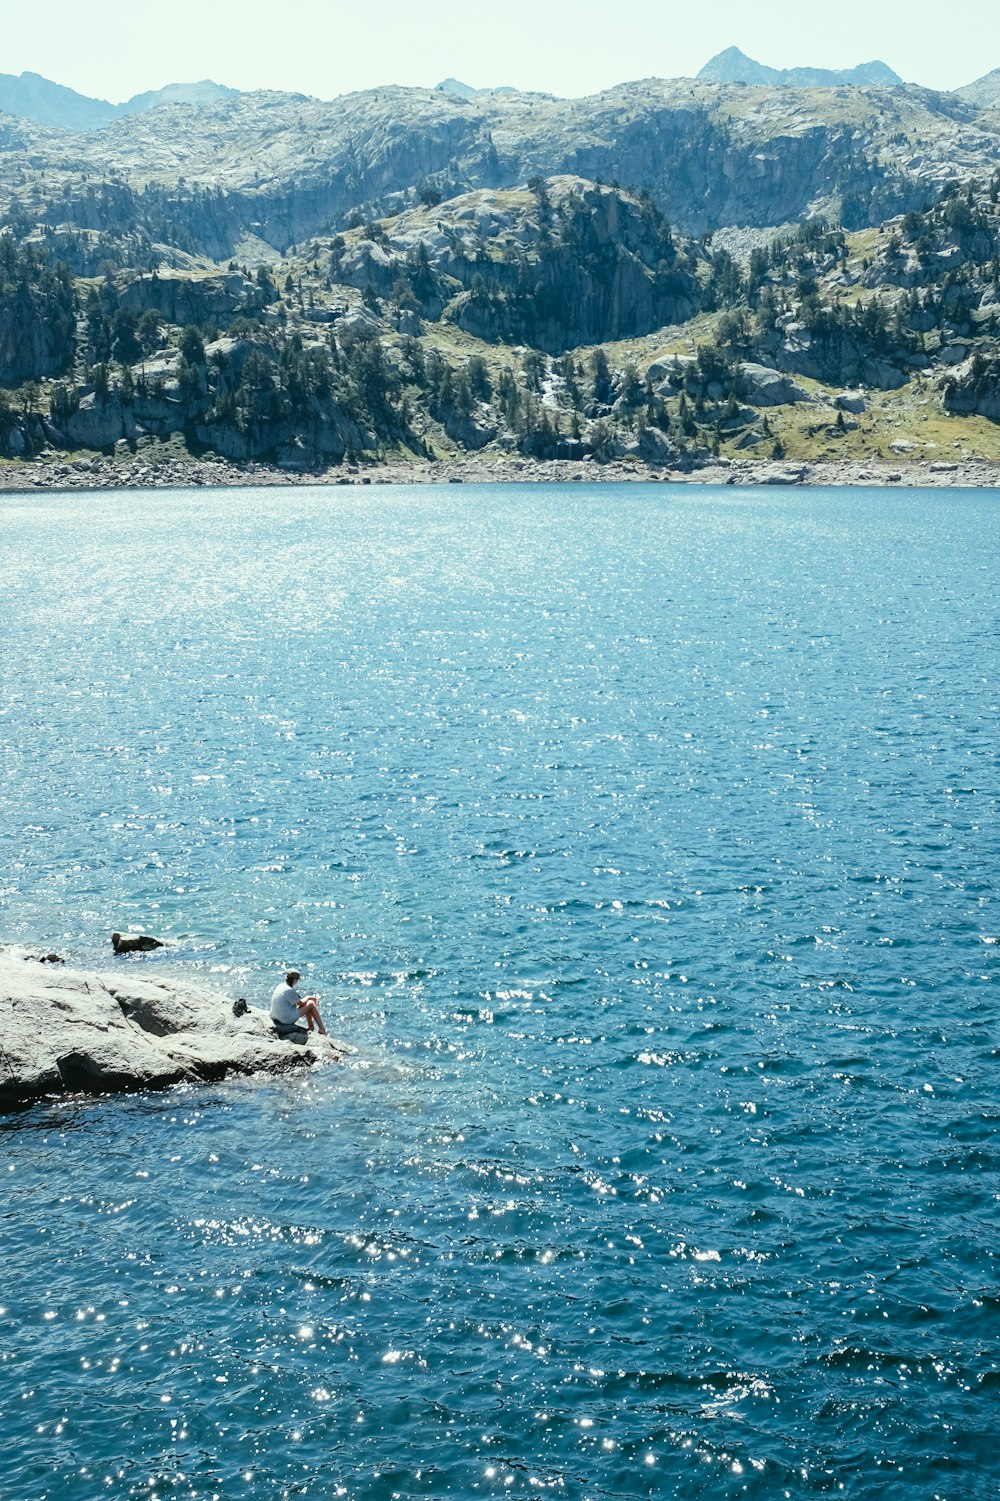 a person standing on a rock in the middle of a lake